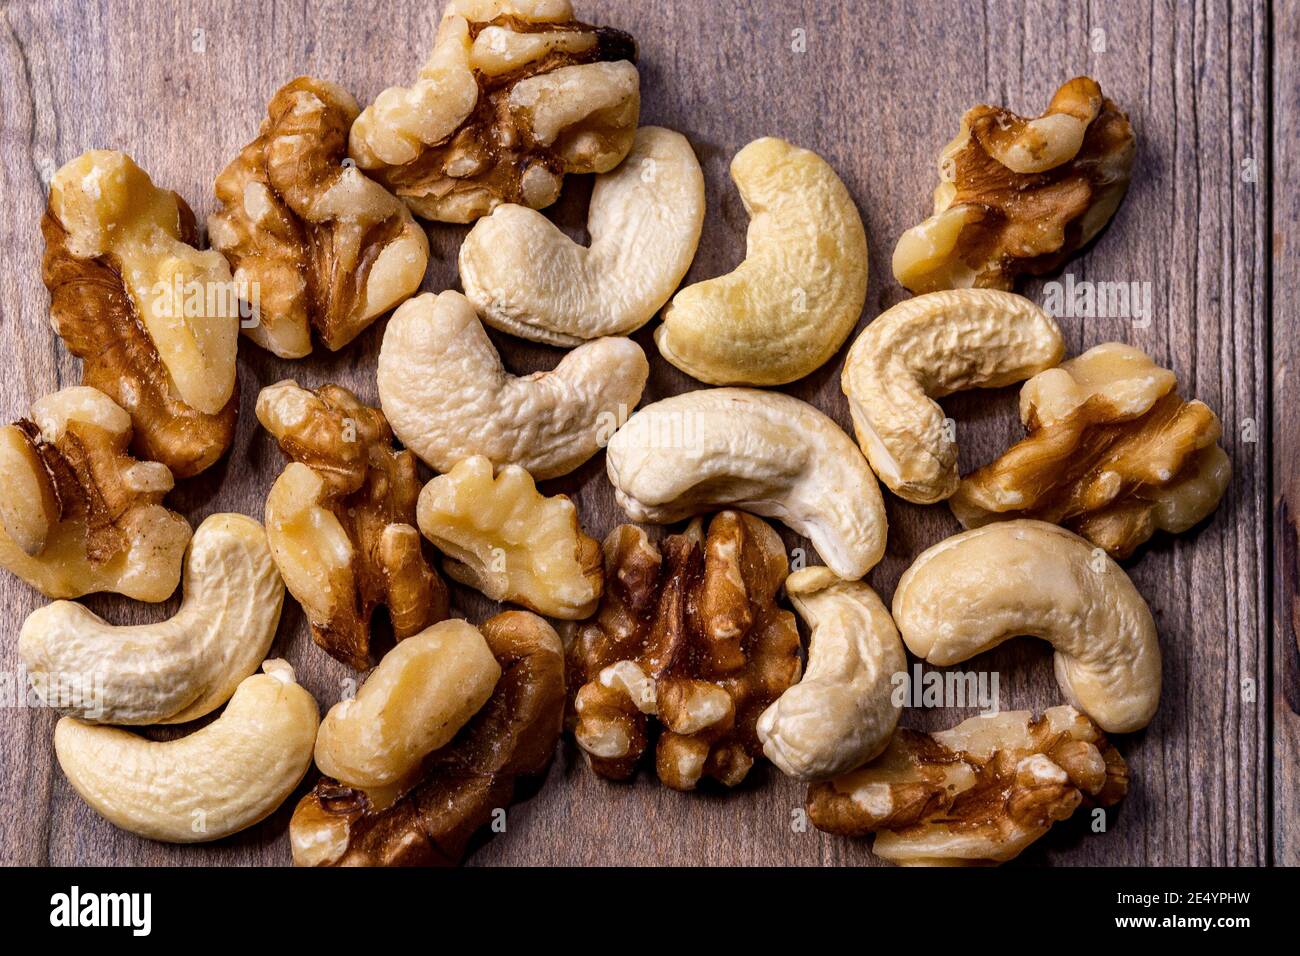 Raw cashews and walnut kernels lie, mixed in a bunch, on a wooden table Stock Photo